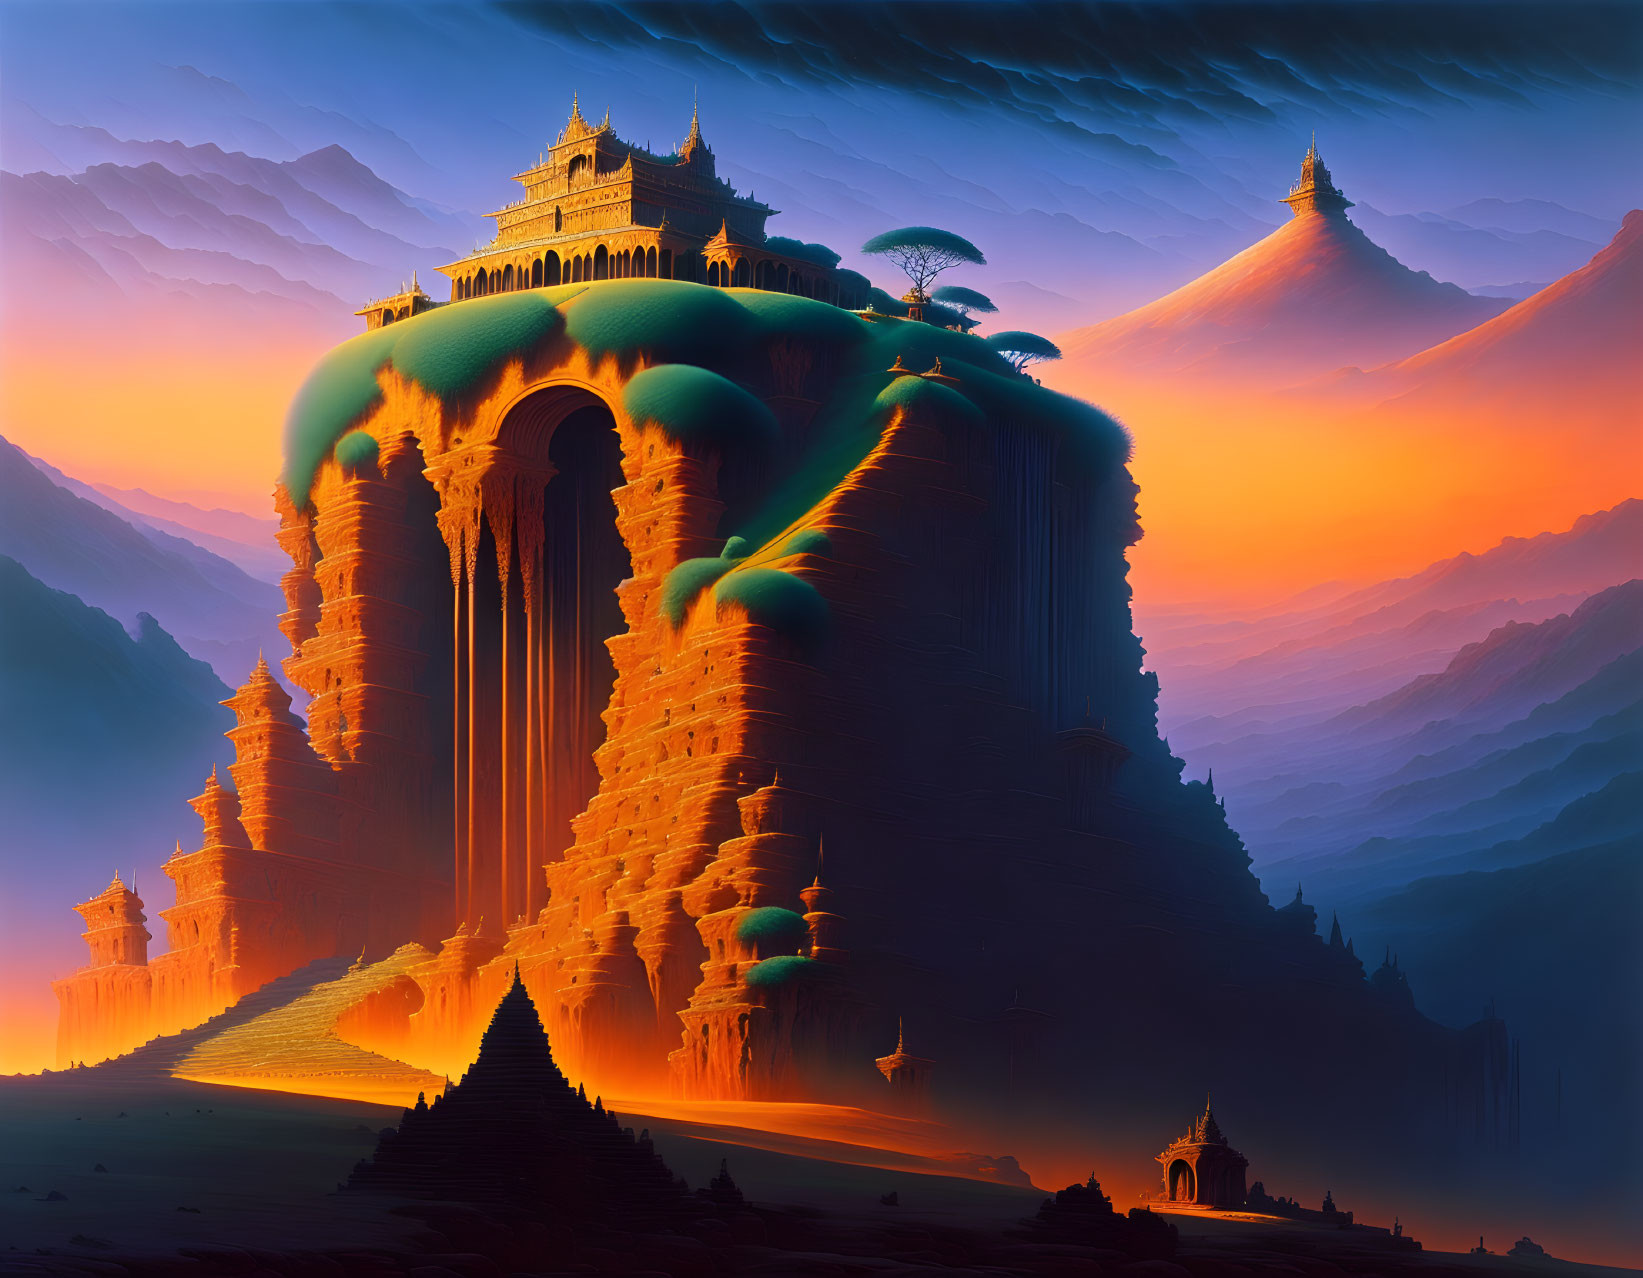 Majestic castles on towering cliffs in a fantasy sunset realm